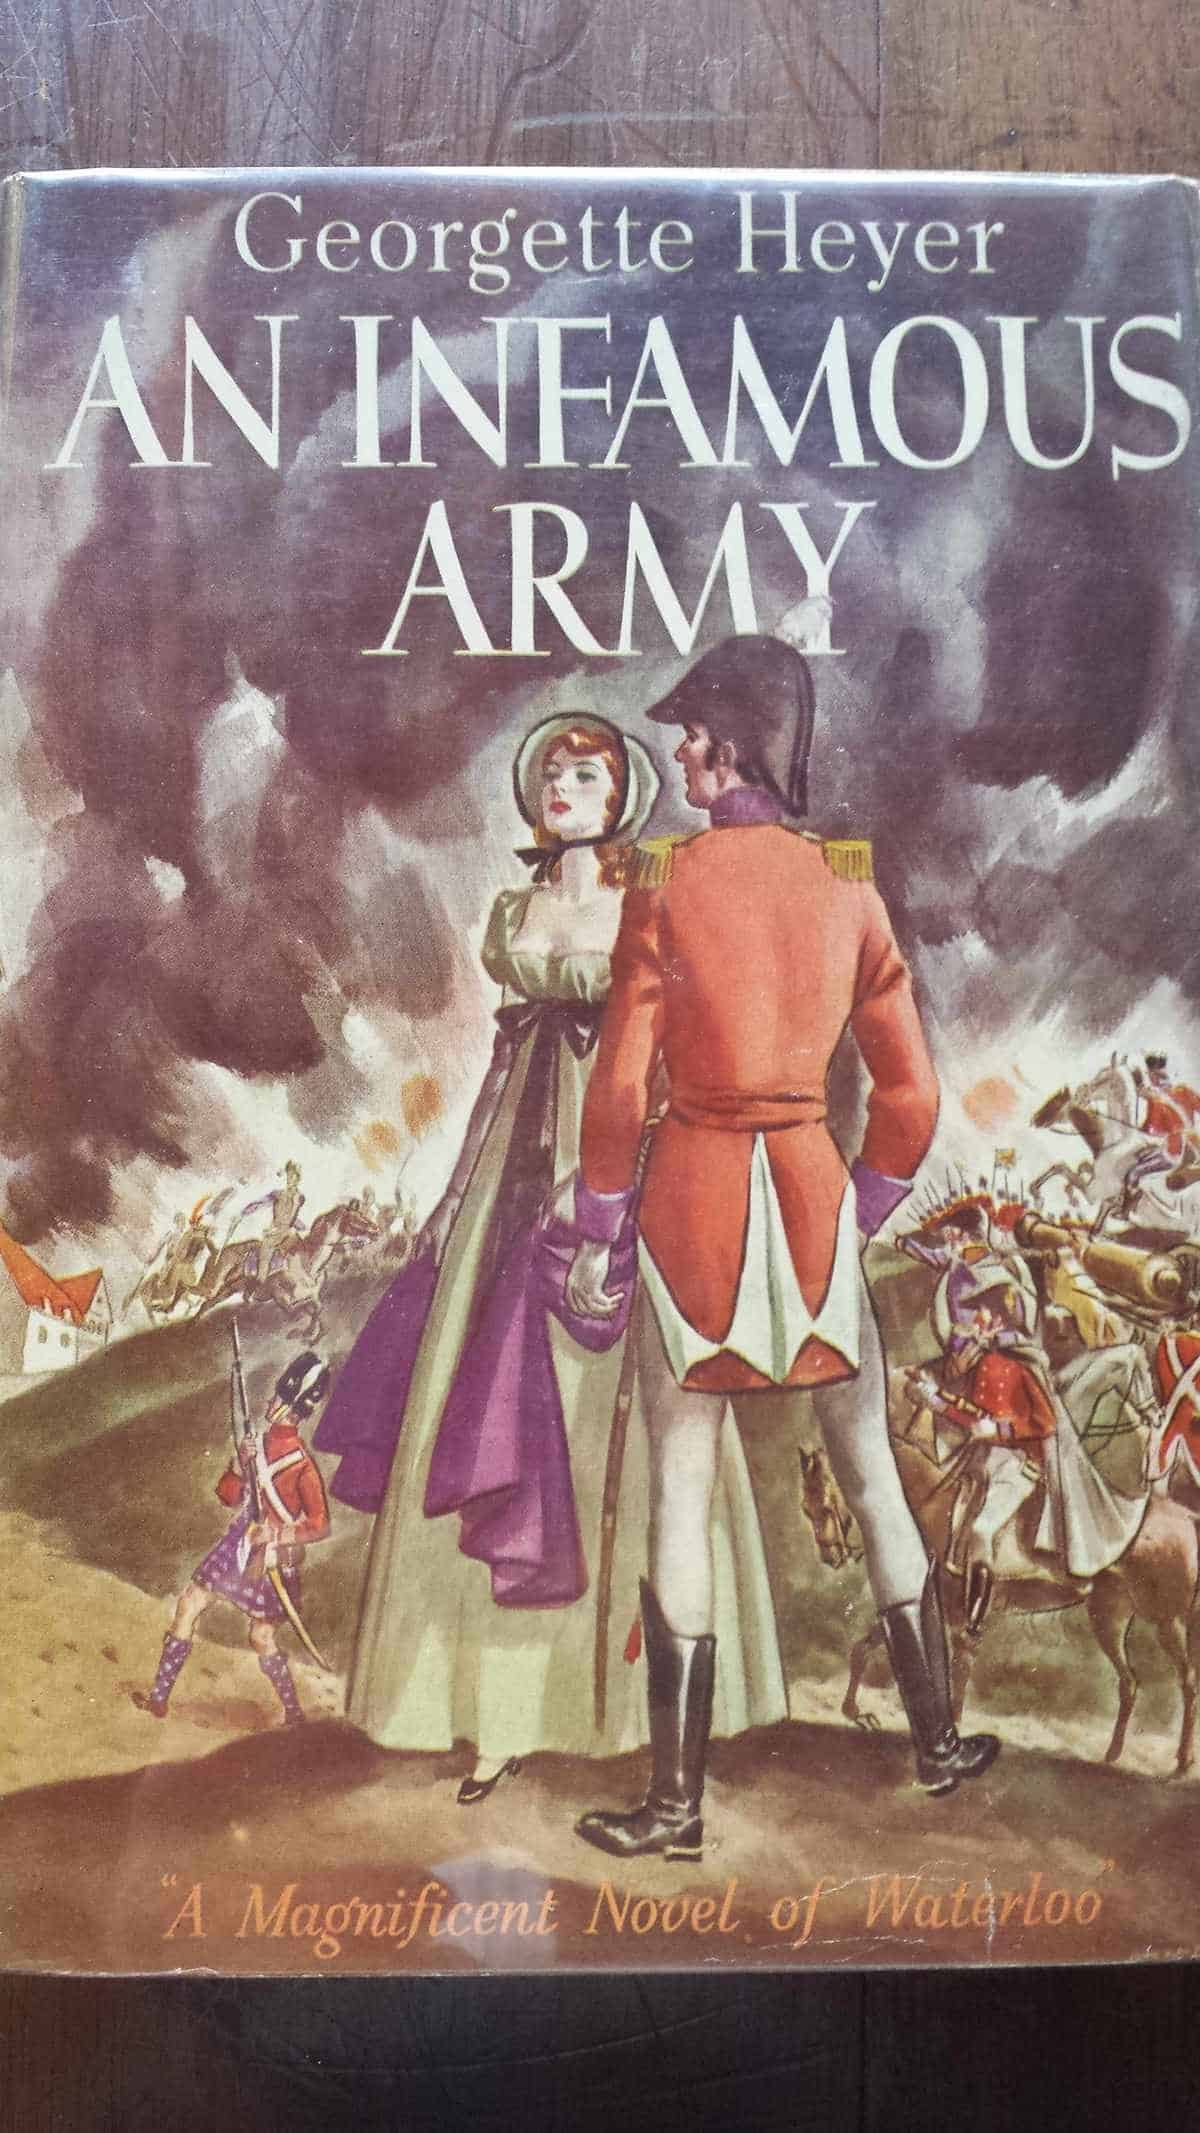 Georgette's novel of Waterloo An Infamous Army, the US first edition